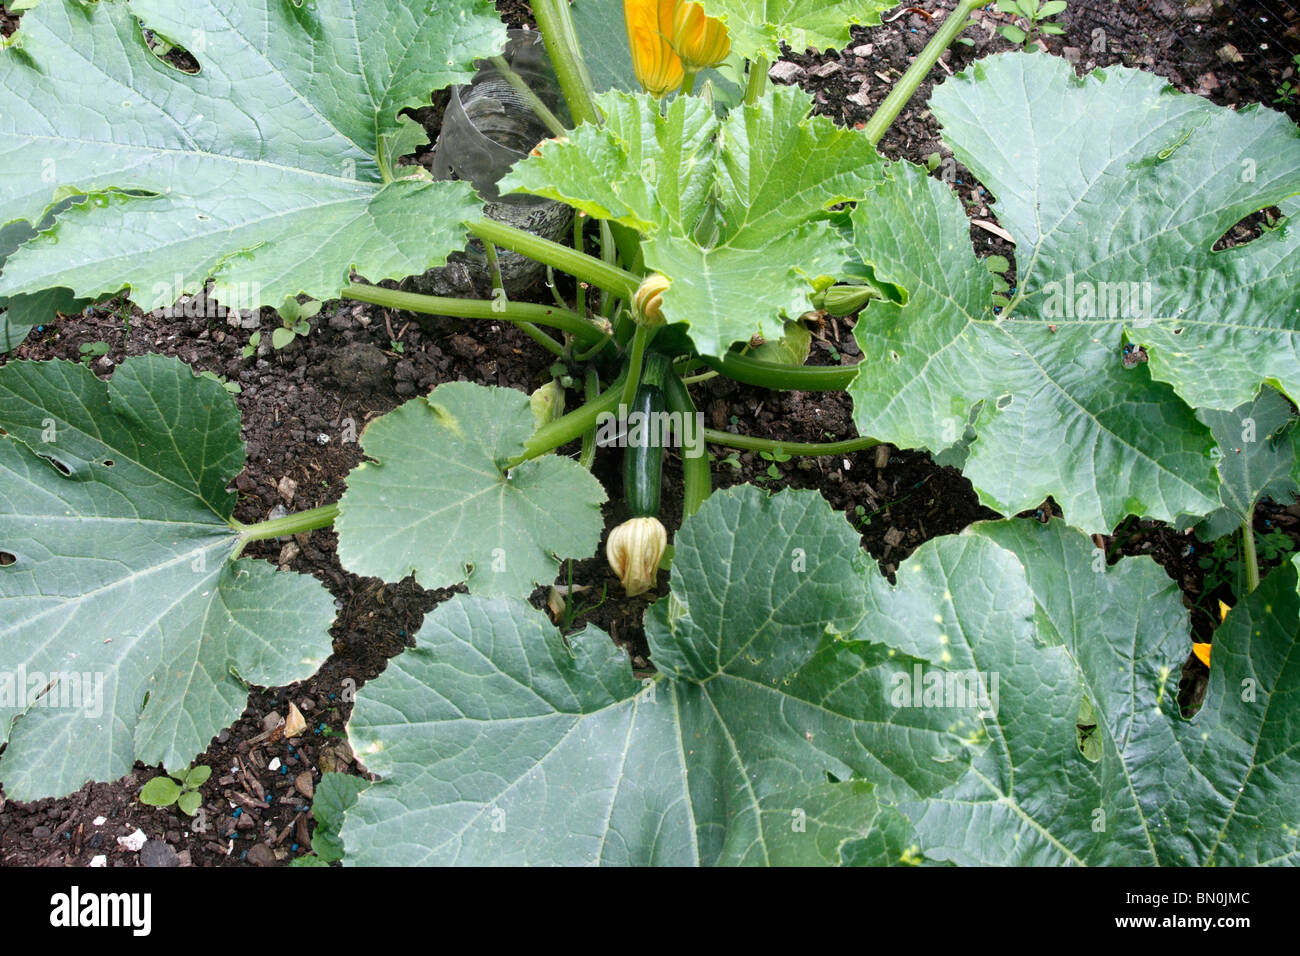 Young courgette or zucchini plant Cucurbita pepo with courgettes (fruit)  already growing Stock Photo - Alamy